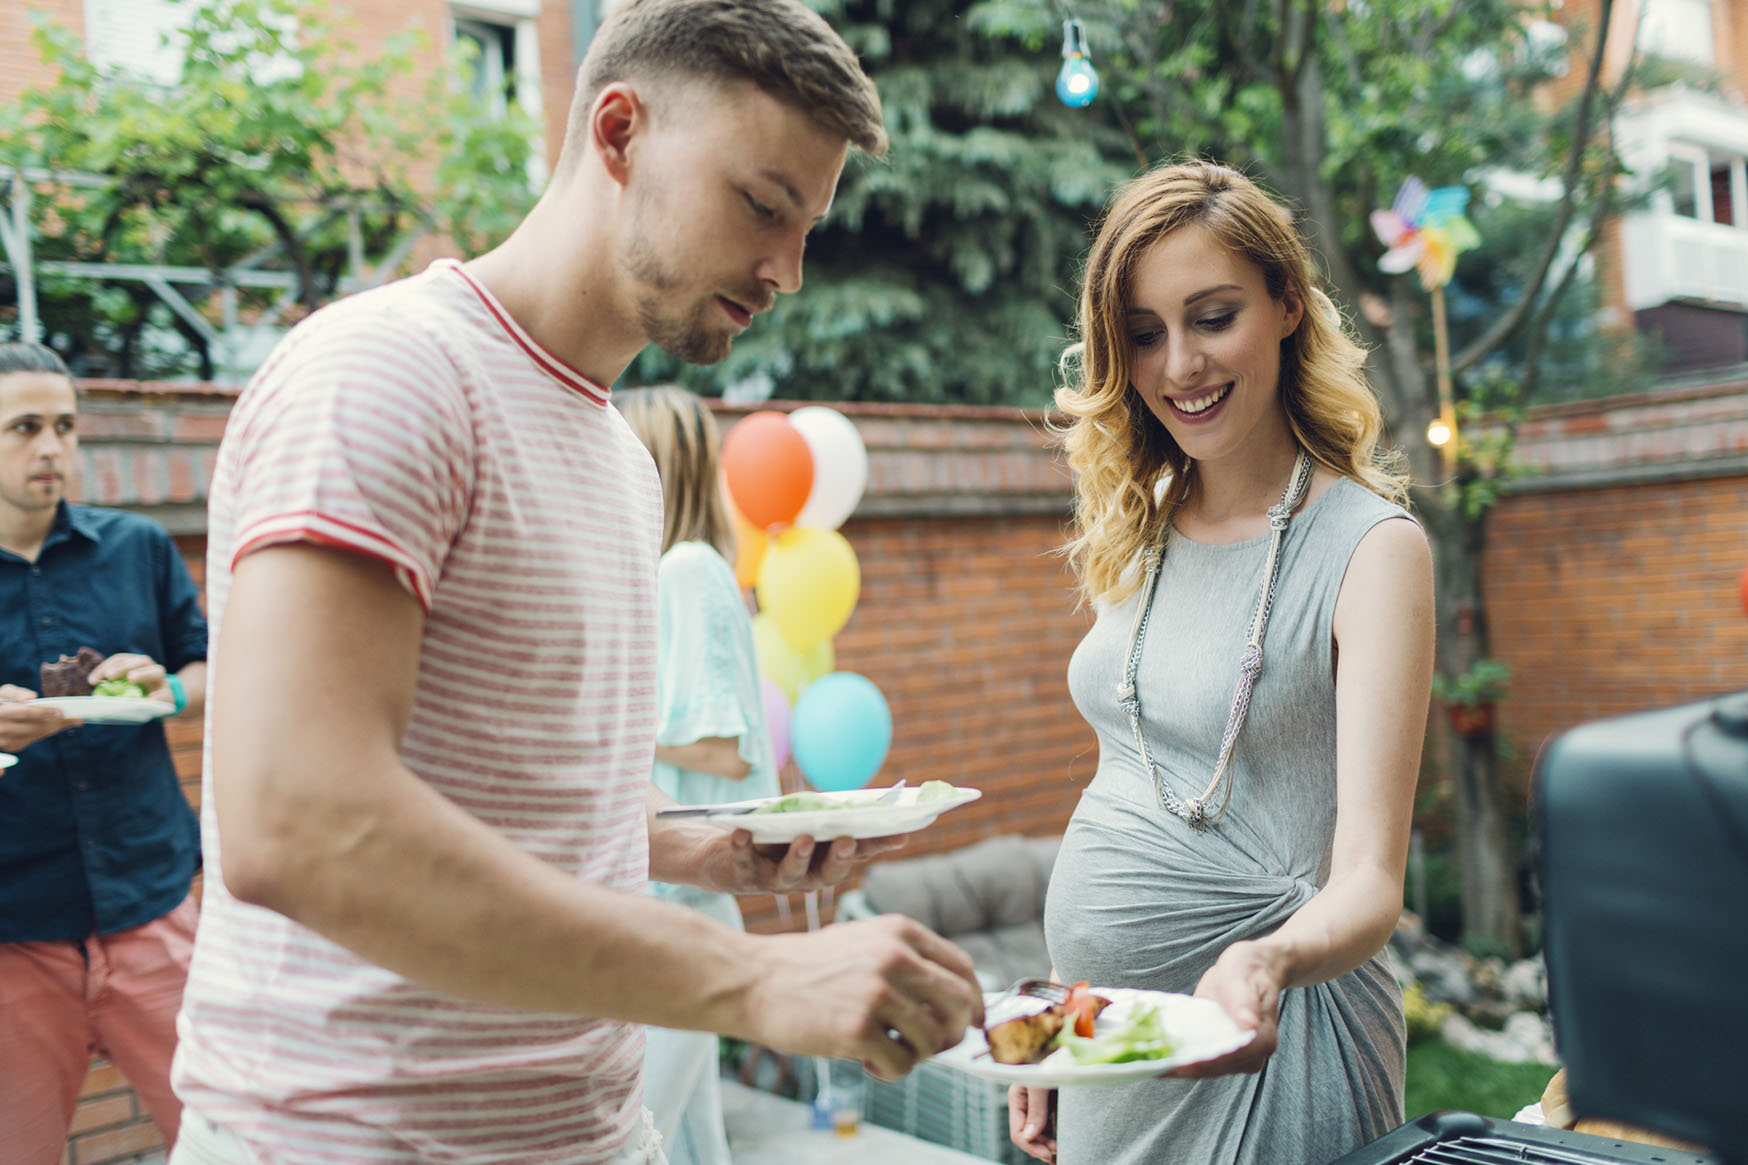 Dress your bump for summer, Pregnancy articles & support